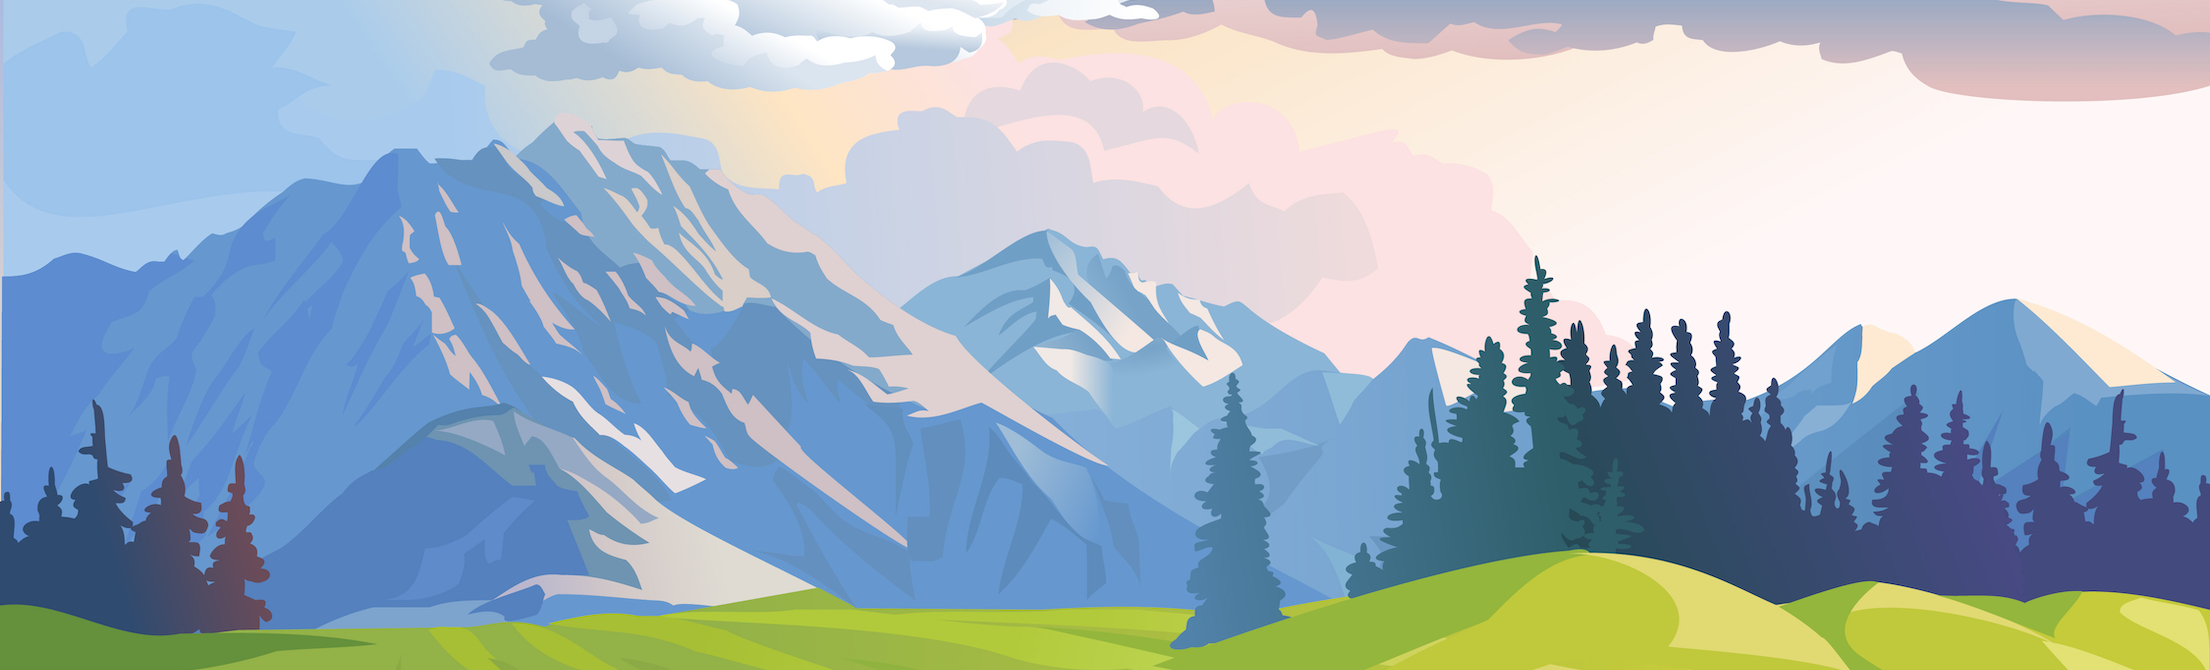 Cartoon image of mountain landscape with trees and clouds by vectorpocket / Freepik.